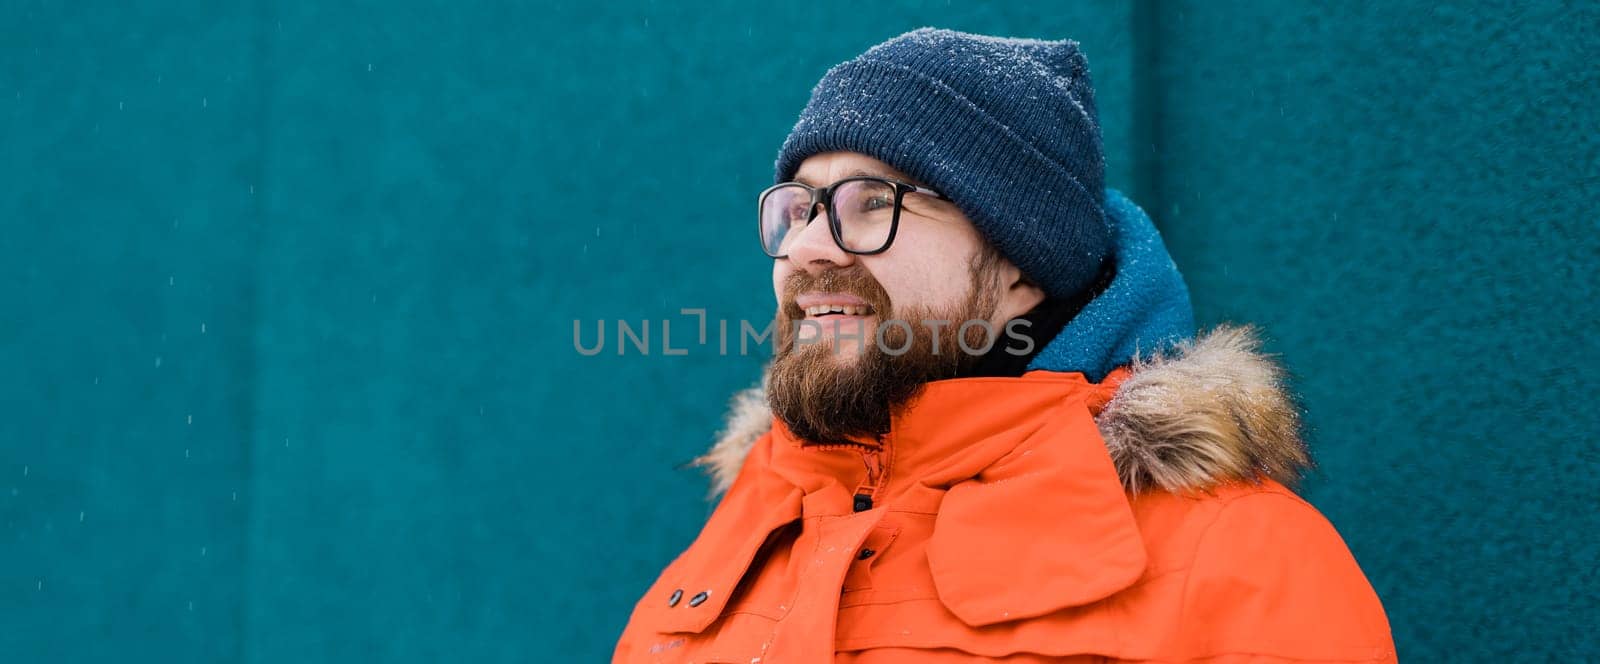 Banner portrait handsome eyeglasses young male smiling bearded stands on a blue wall background in a bright orange winter jacket with a hood with fur in winter copy space. Millennial generation and Gen Y concept by Satura86